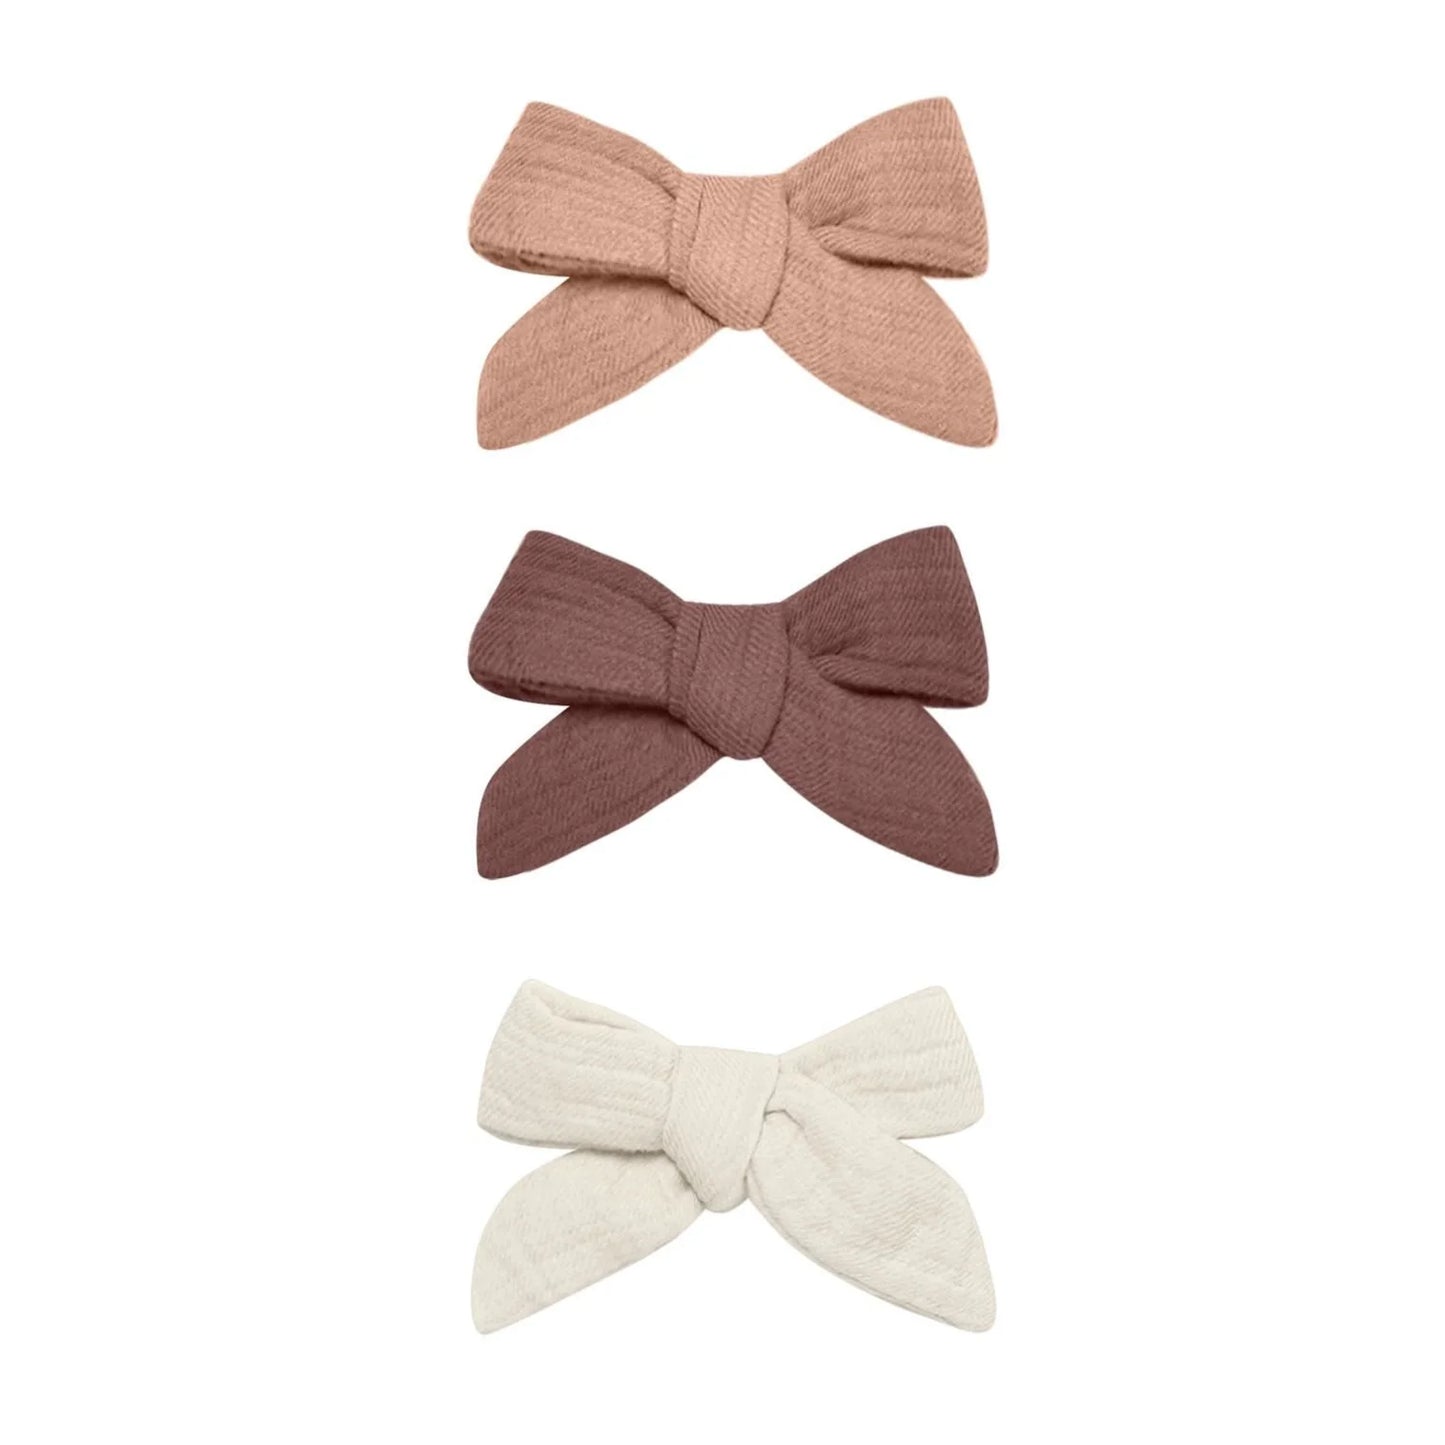 Quincy Mae bow clip set of 3